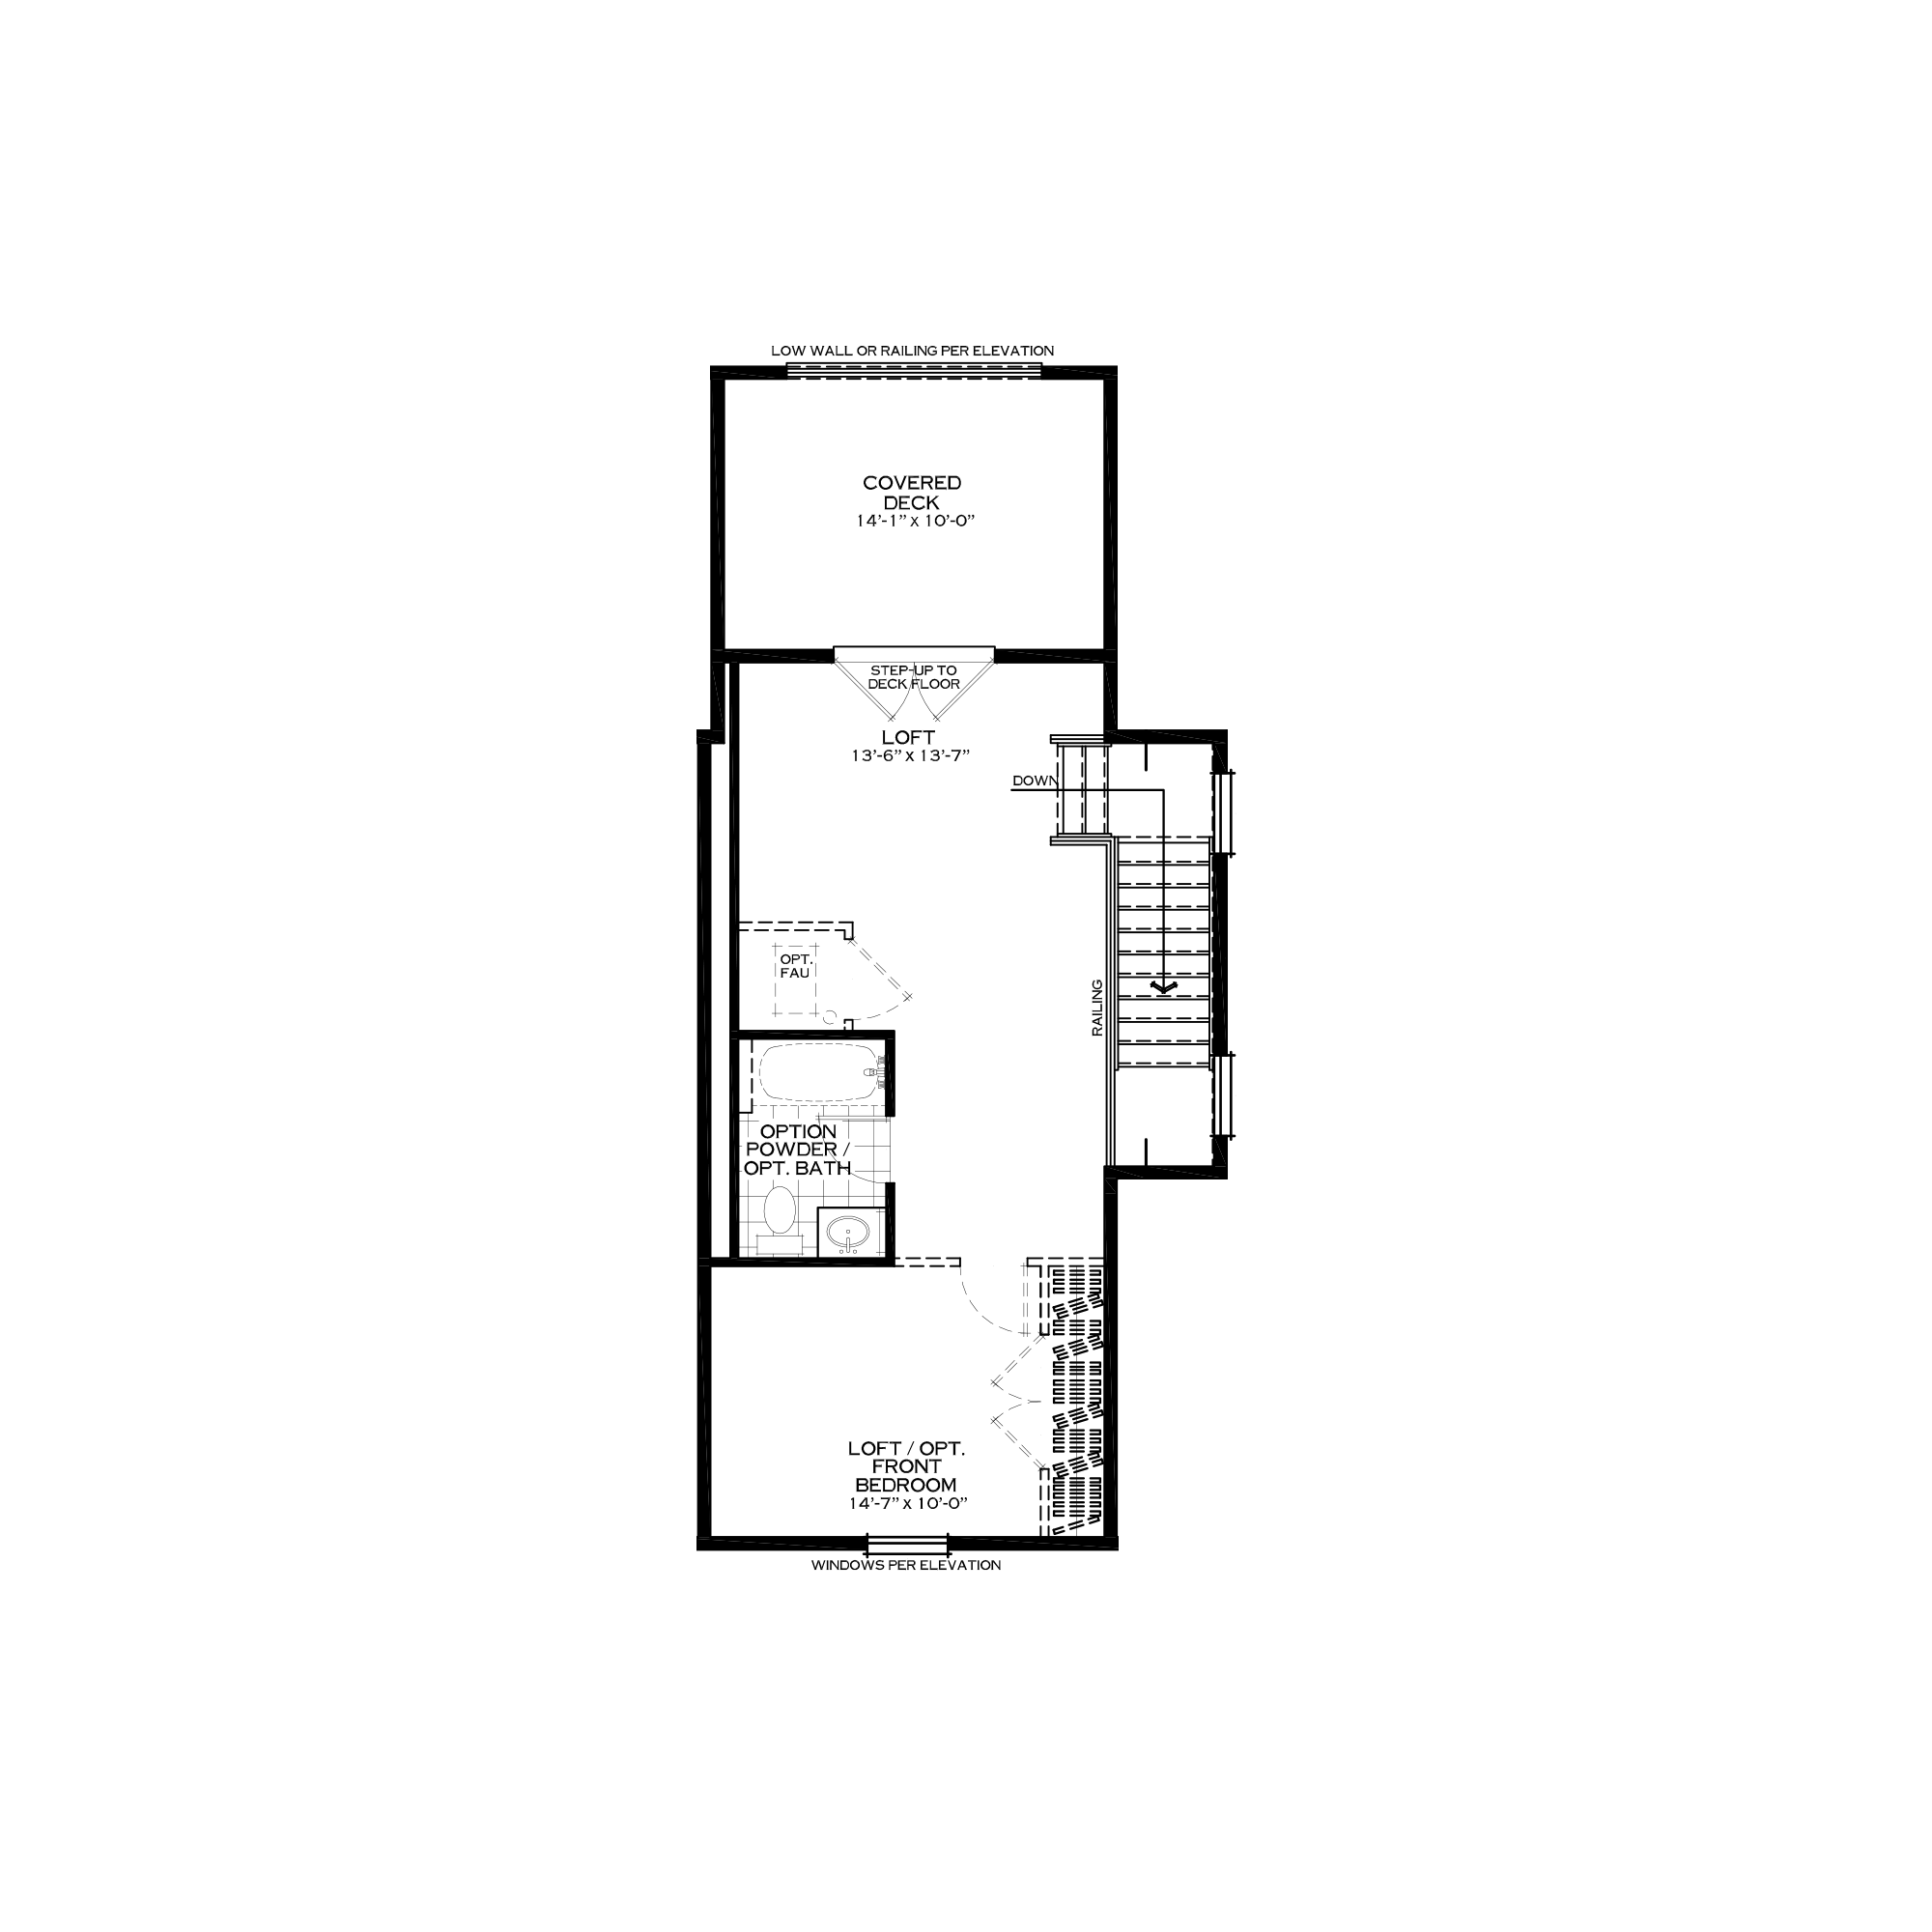 Optional Loft with Rear Covered Deck